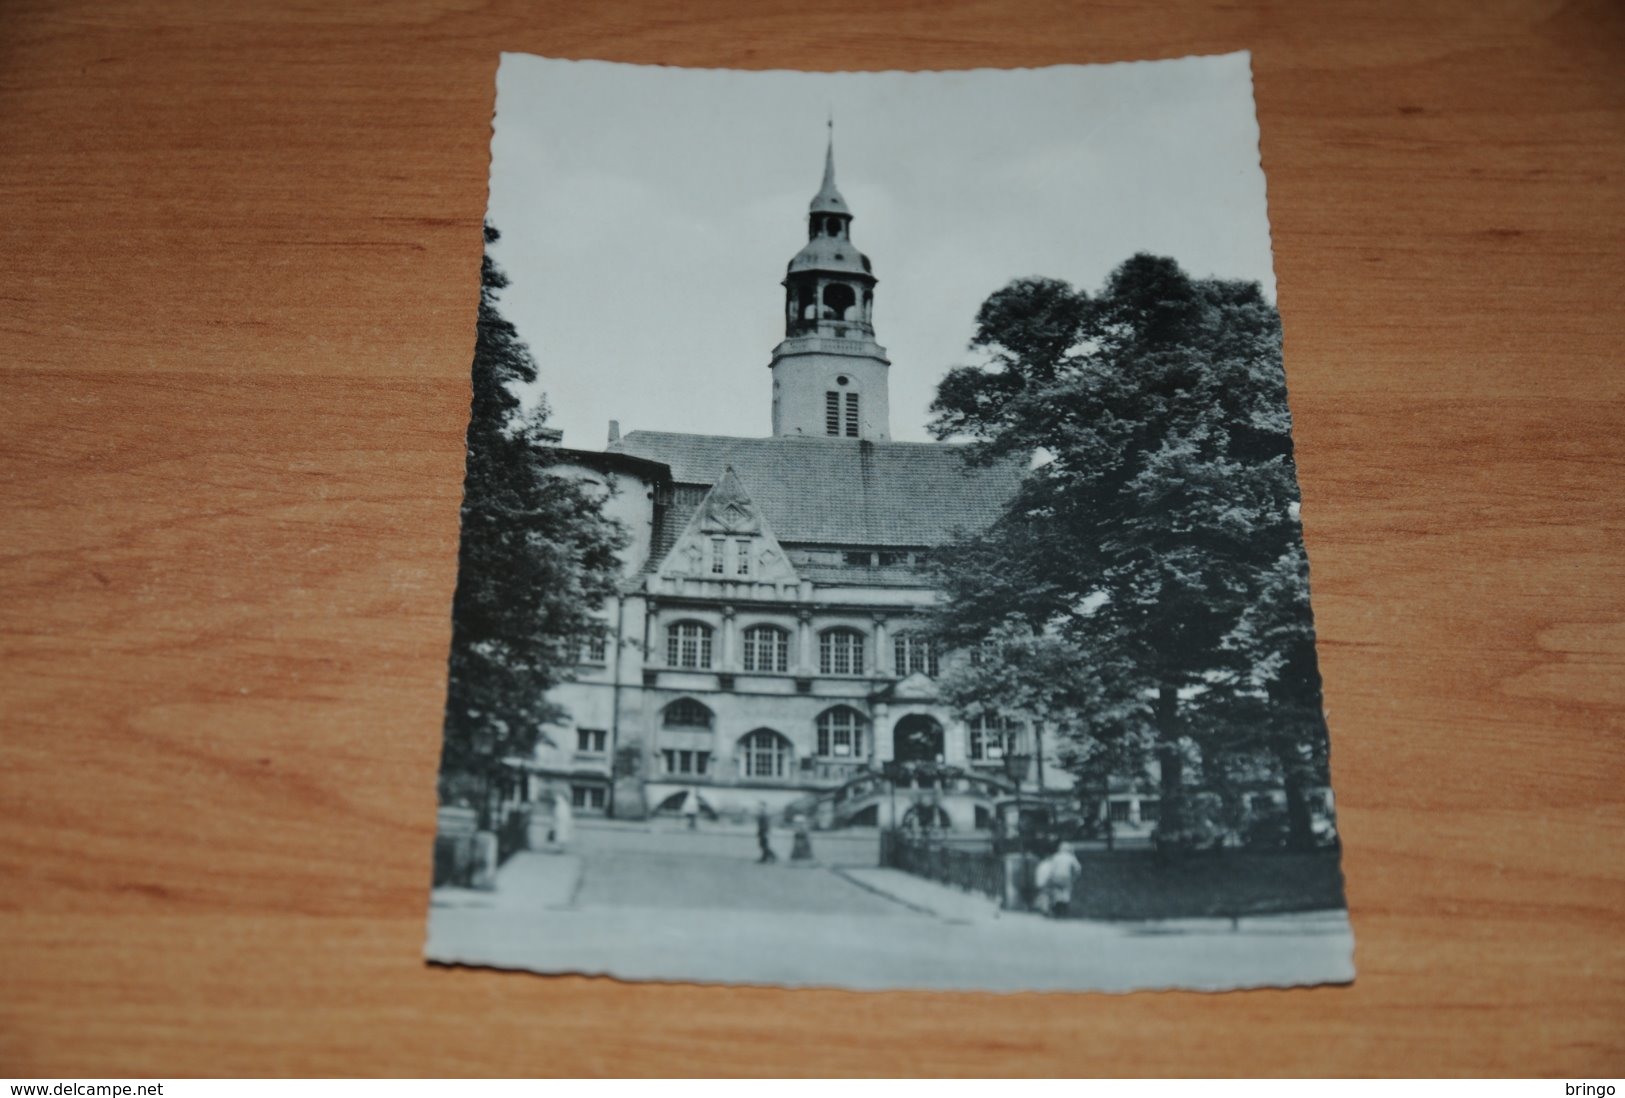 691-     CELLE, MUSEUM MIT STADTKIRCHE - Celle